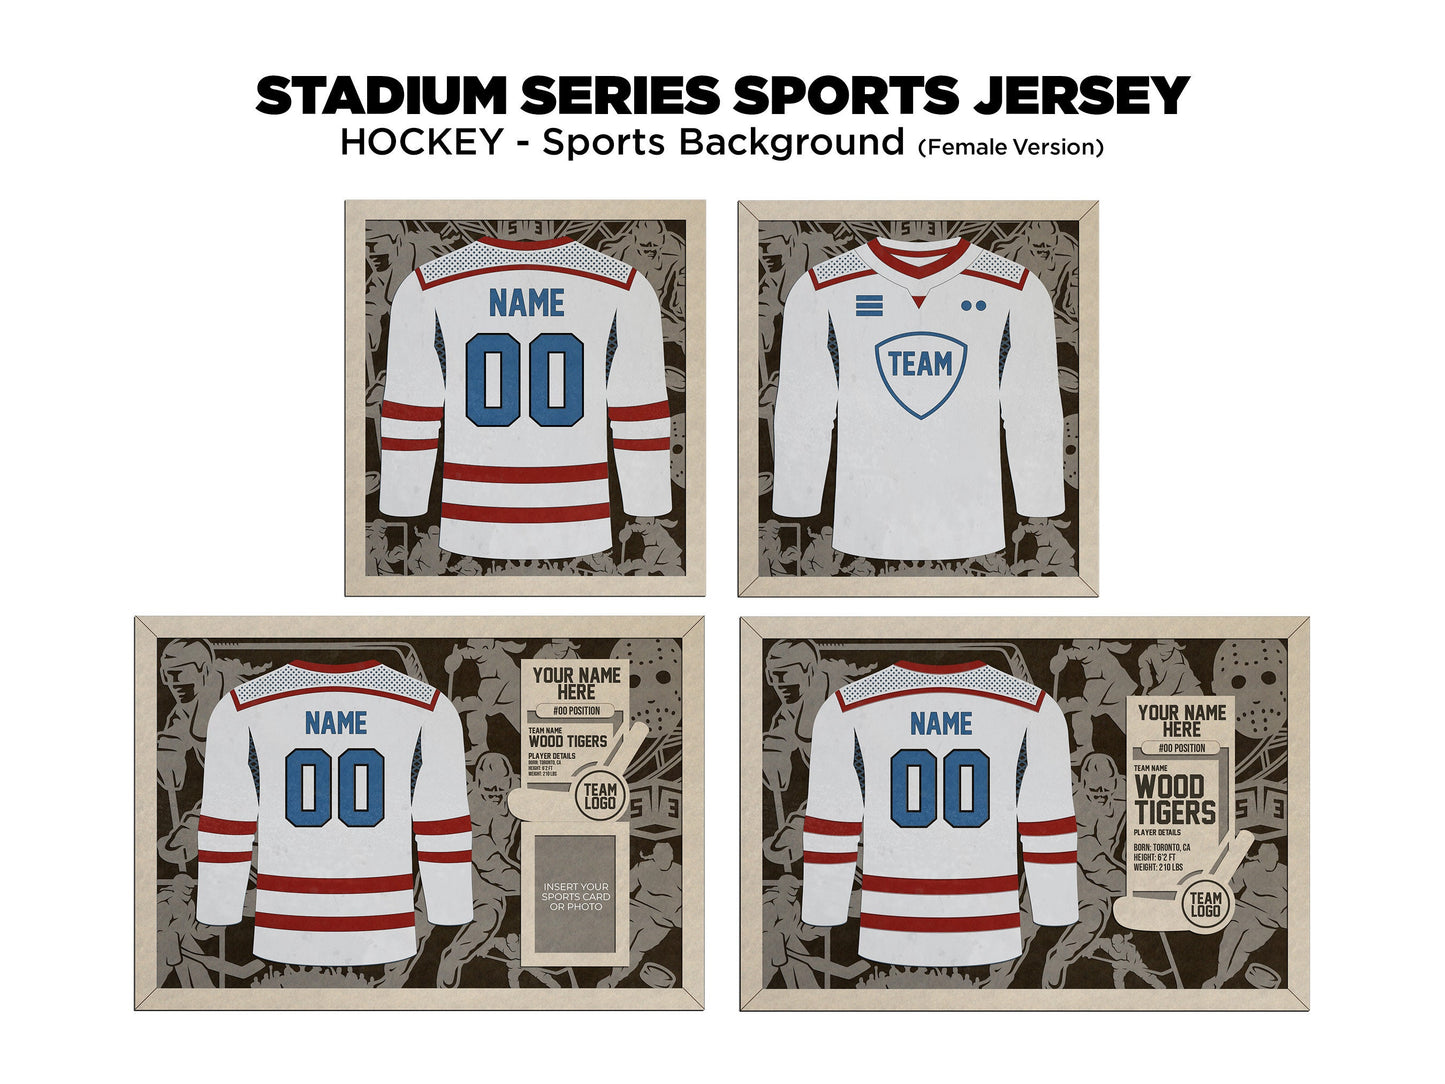 Stadium Series Jerseys - Hockey - 3 Variations - Male, Female & Alternate Backgrounds - SVG File Download - Sized for Glowforge